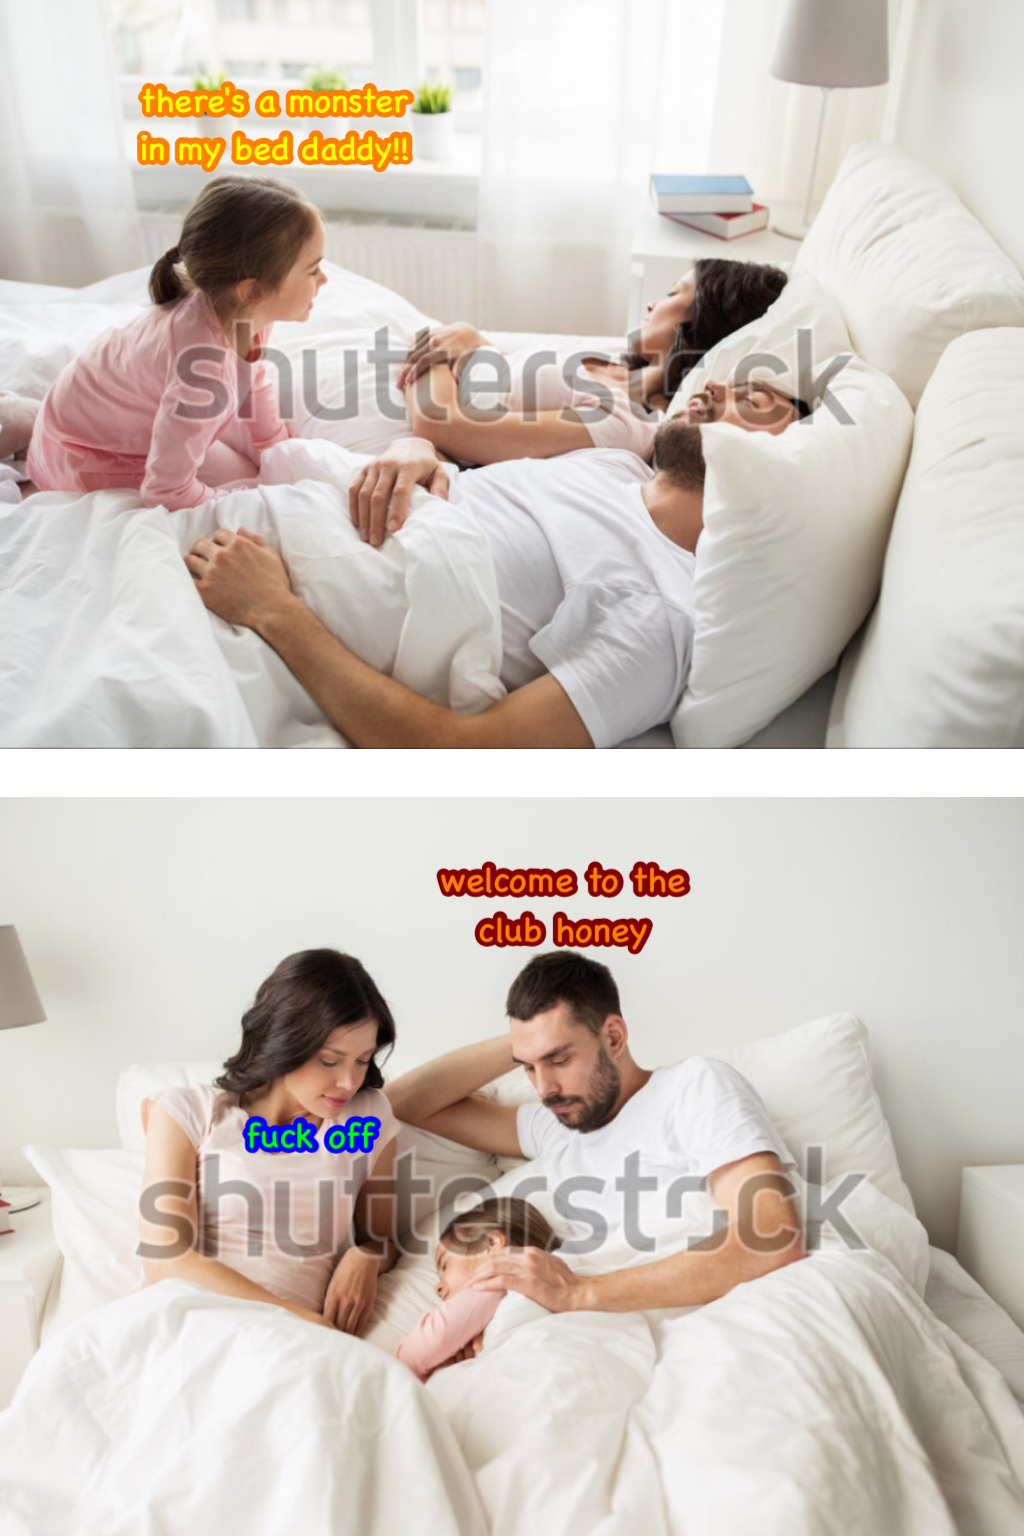 dank meme there's a monster in my bed daddy shutcerstok welcome to the club honey fuck off shutterstock